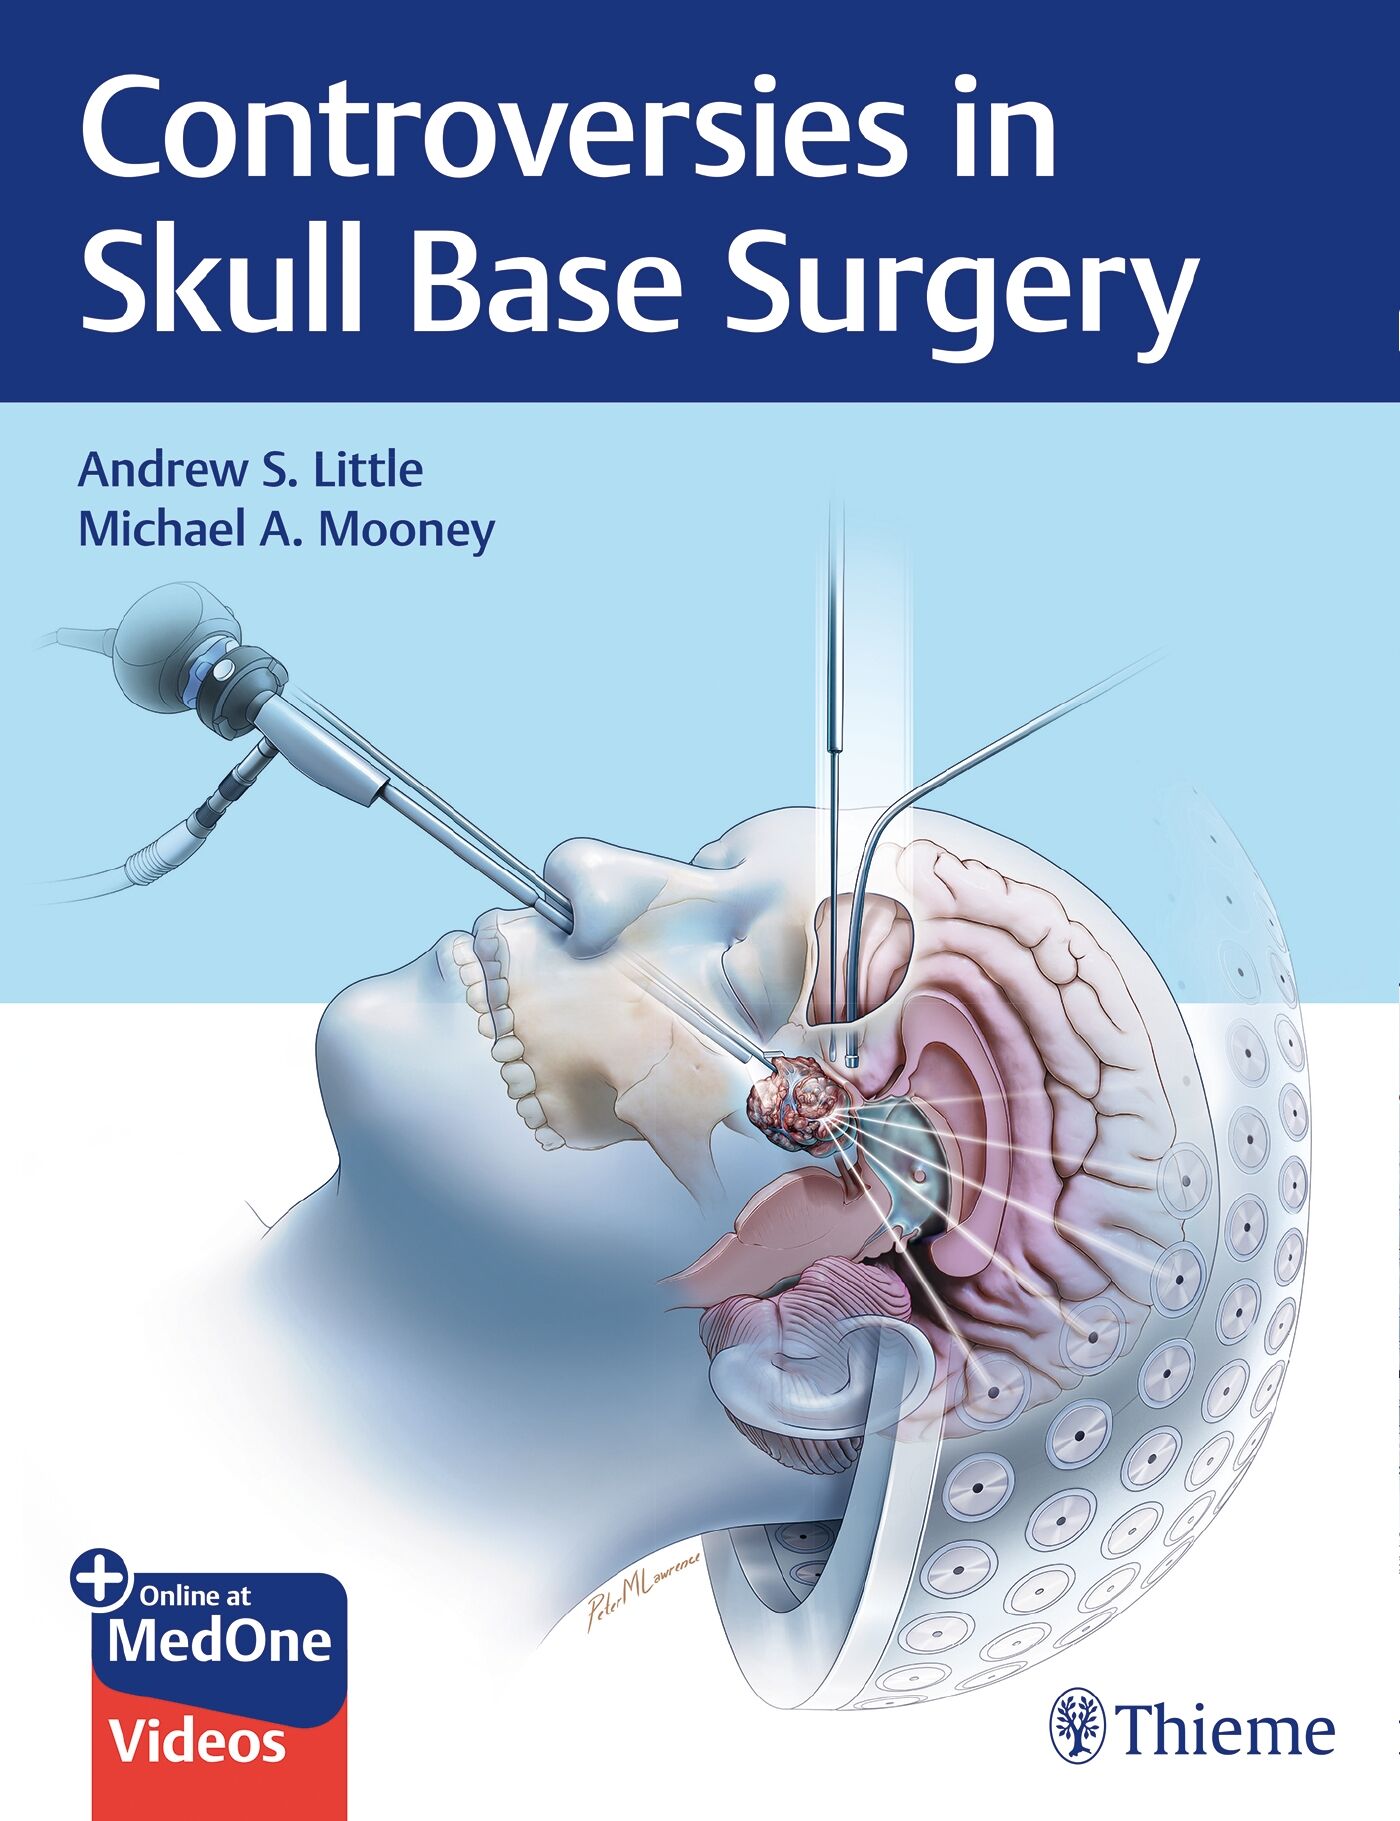 Controversies in Skull Base Surgery, 9781626239531